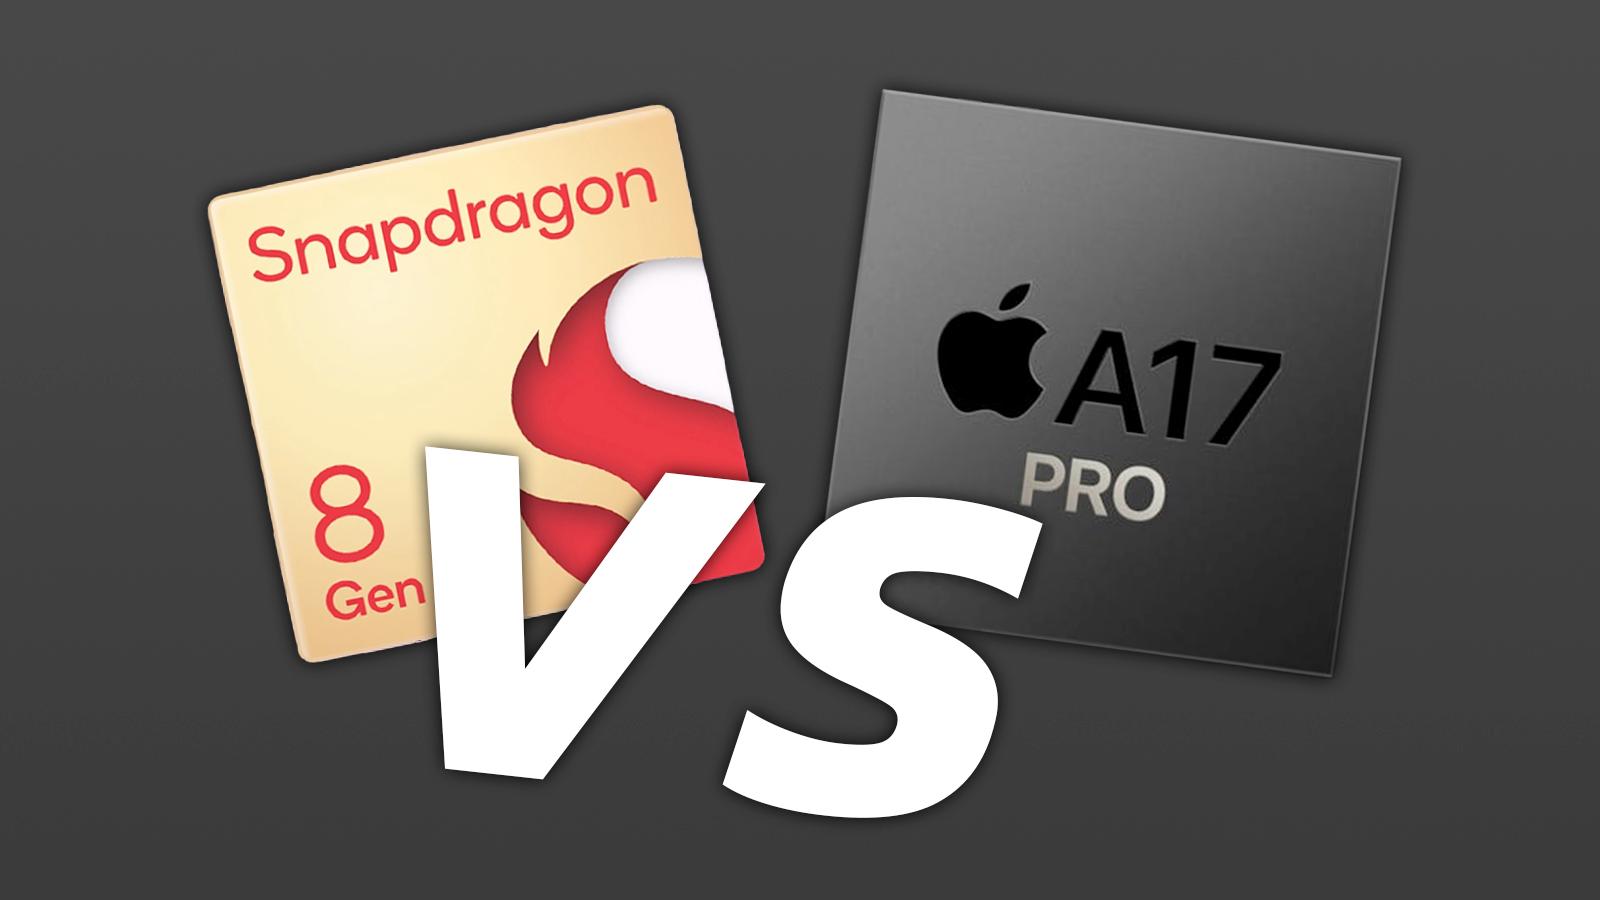 snapdragon and apple chip logos with a big VS over the top